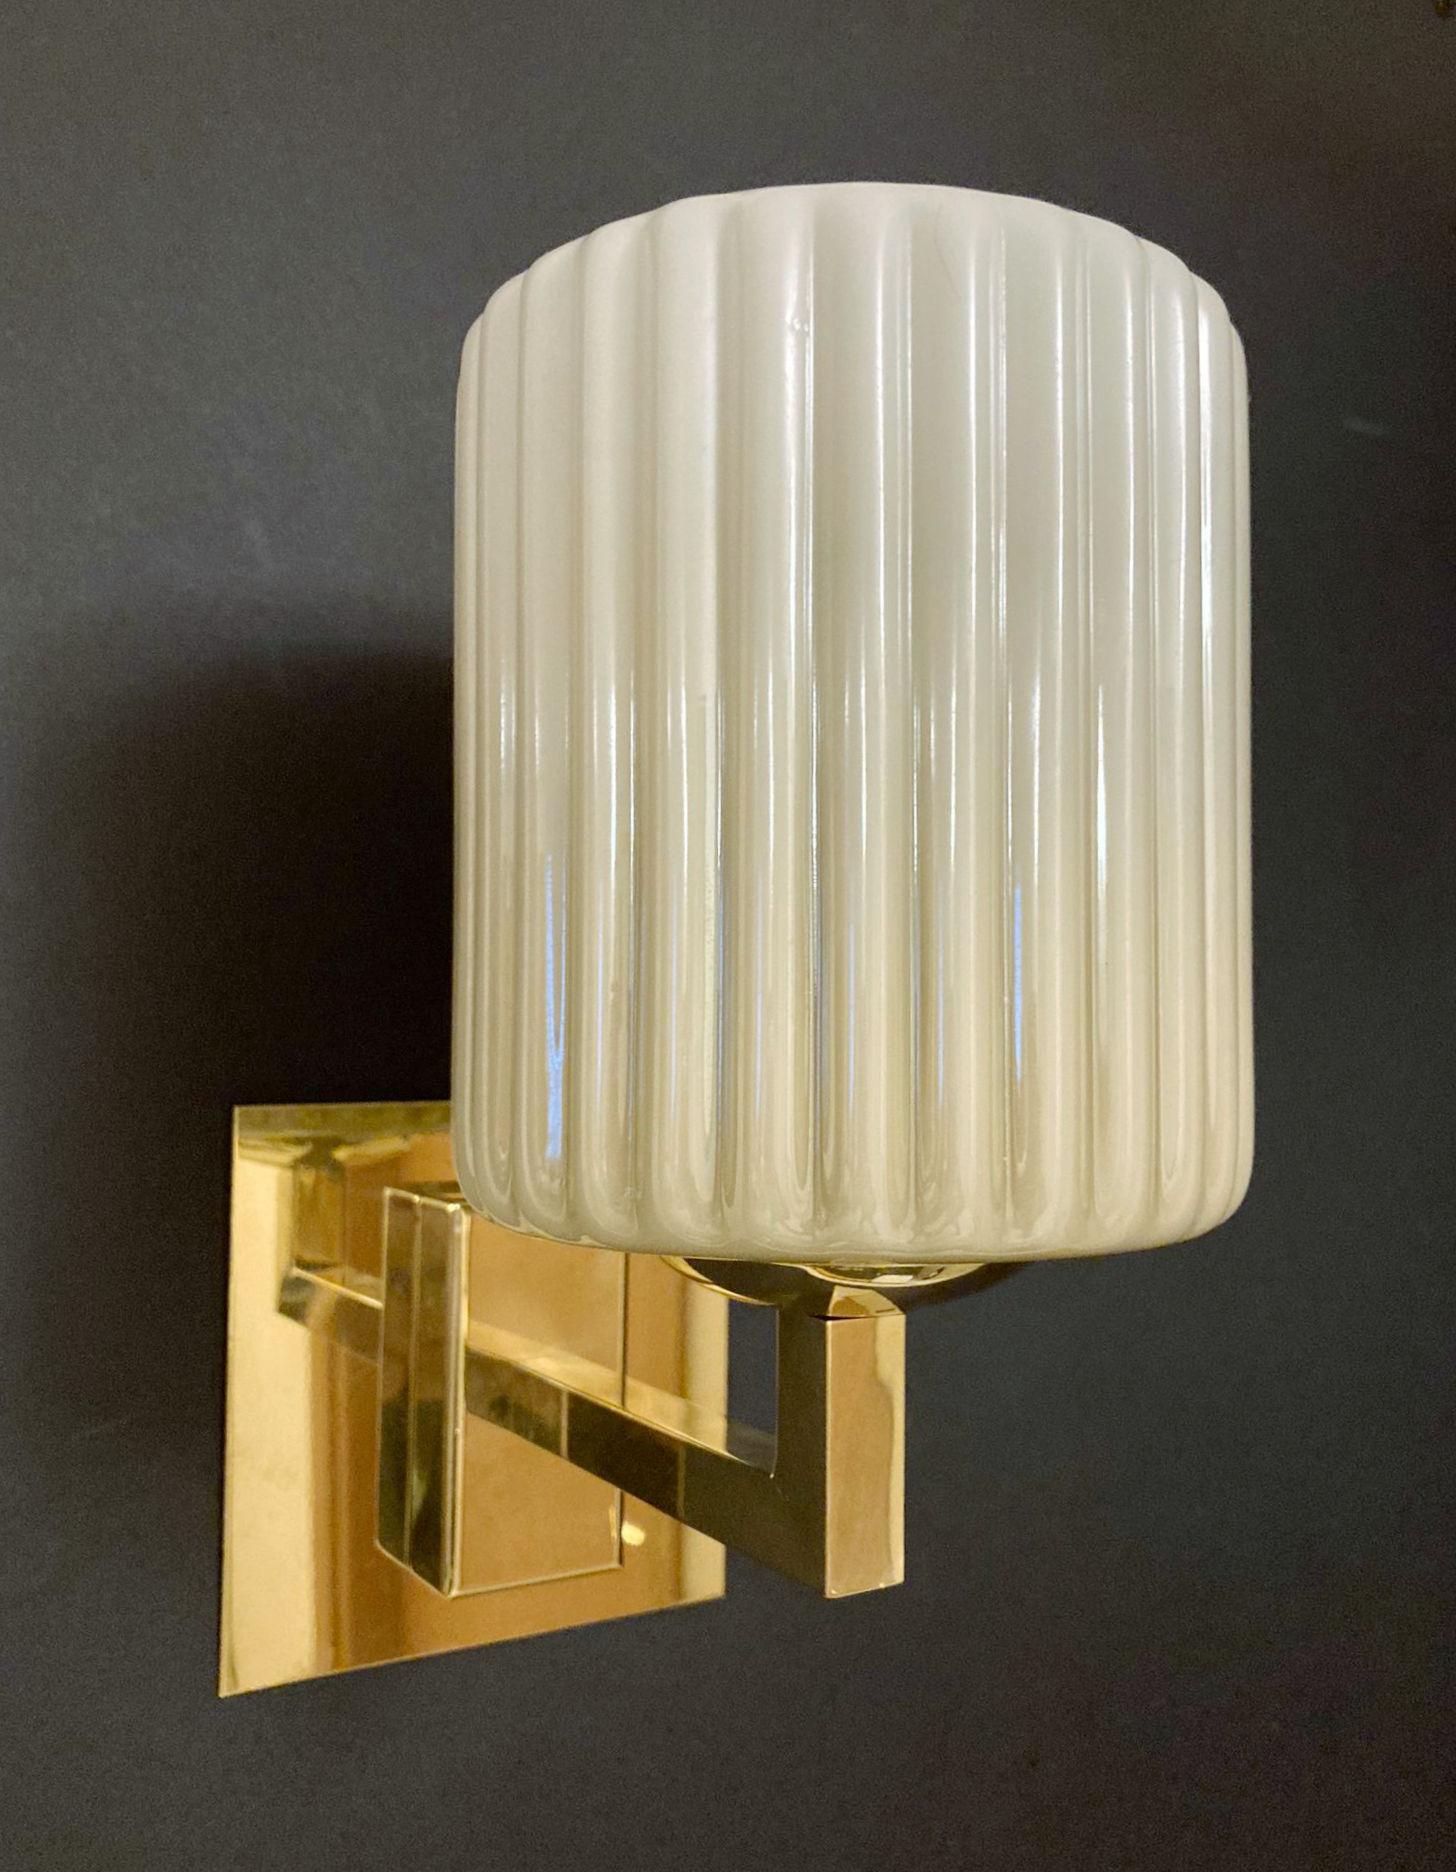 Italian wall light with smoky ribbed Murano glass shades mounted on brass frame / made in Italy by Barovier e Toso, circa 1950s.
Original mark on the backplate.
Measures: Height 10 inches, width 5 inches, depth 8 inches, backplate width 4.7 inches